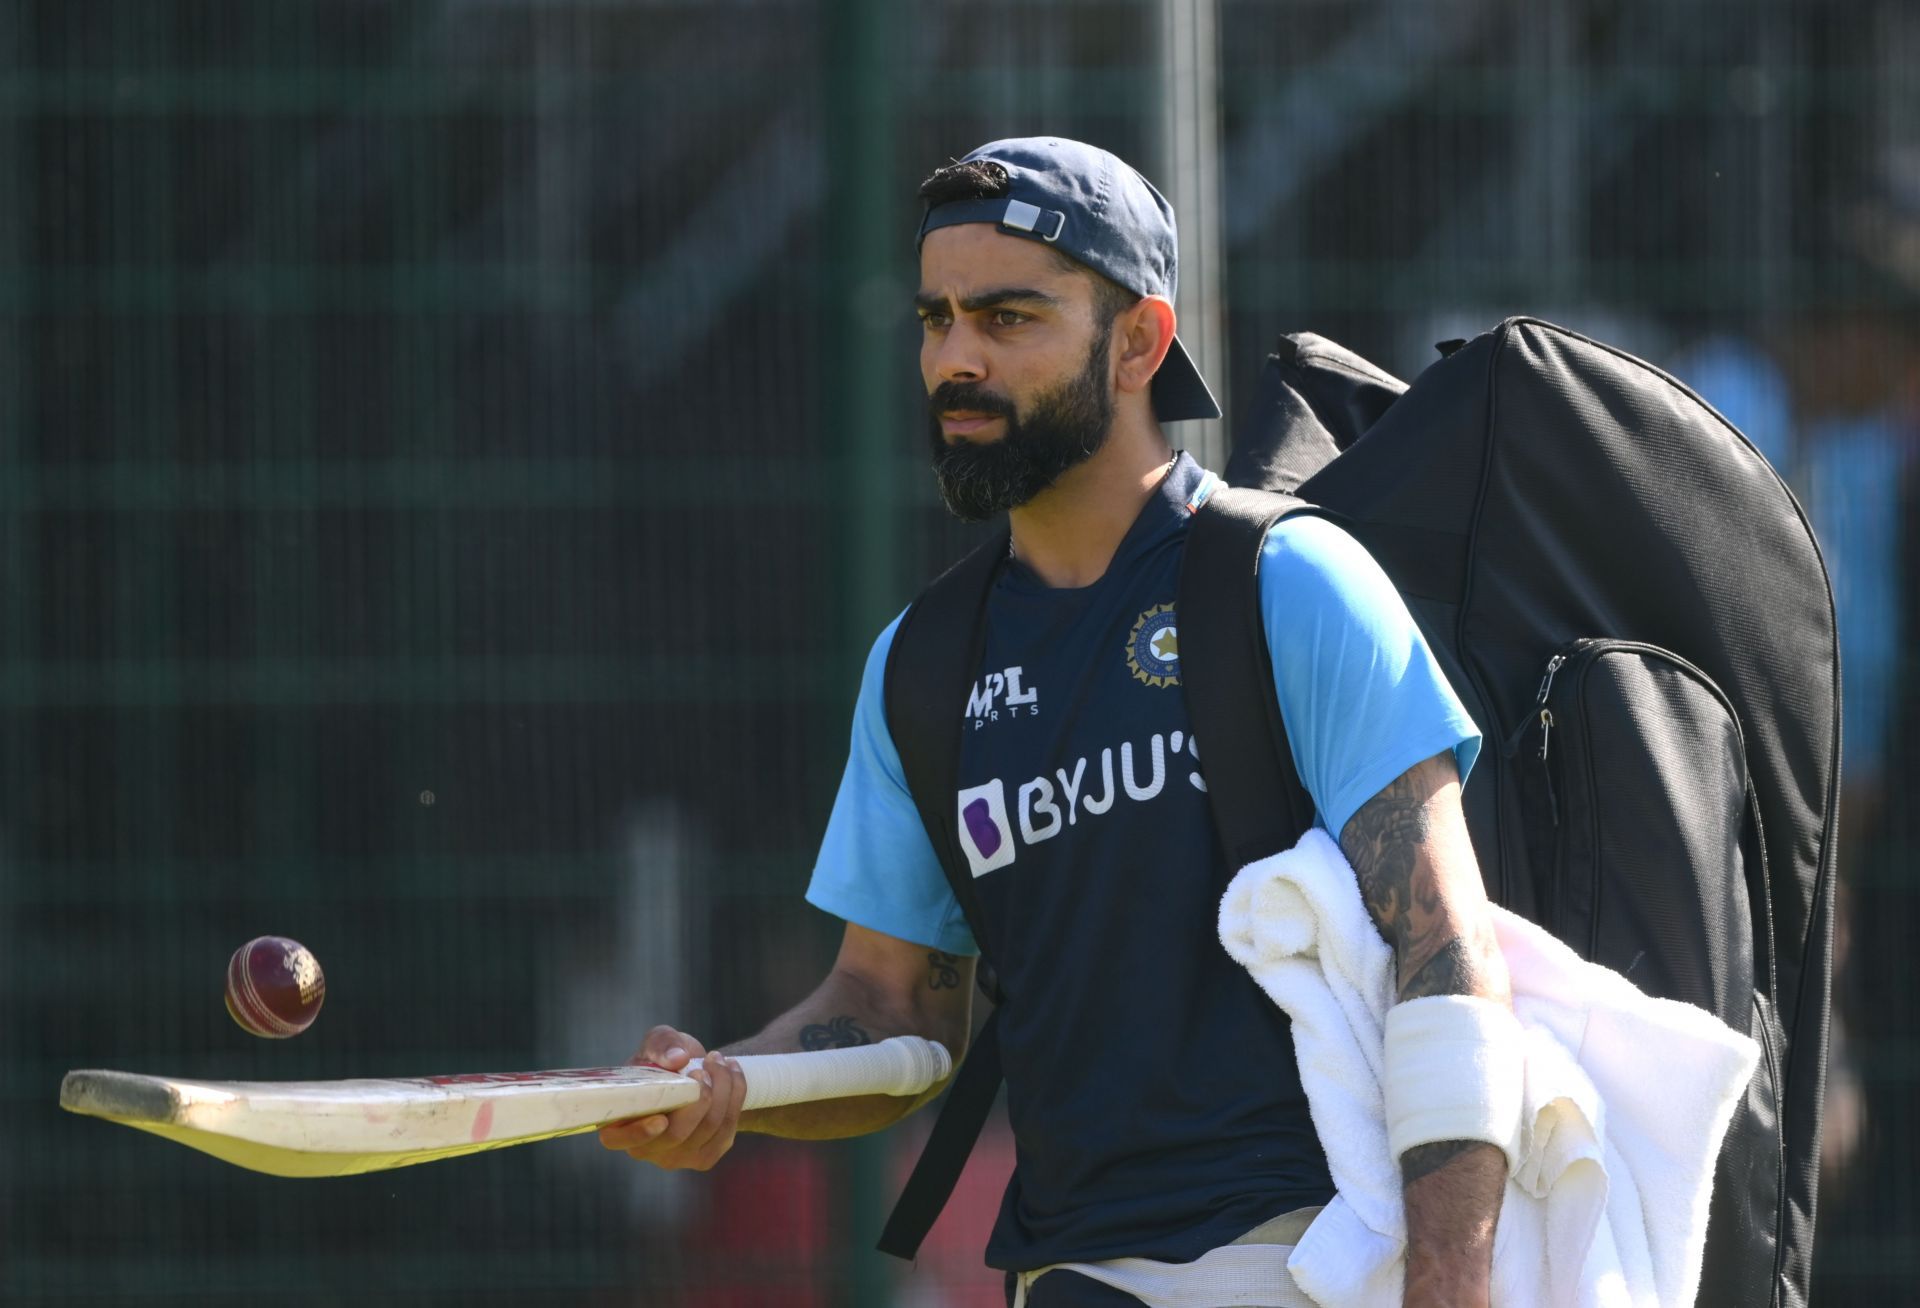 Virat Kohli will not have the burden of captaincy in England this time around